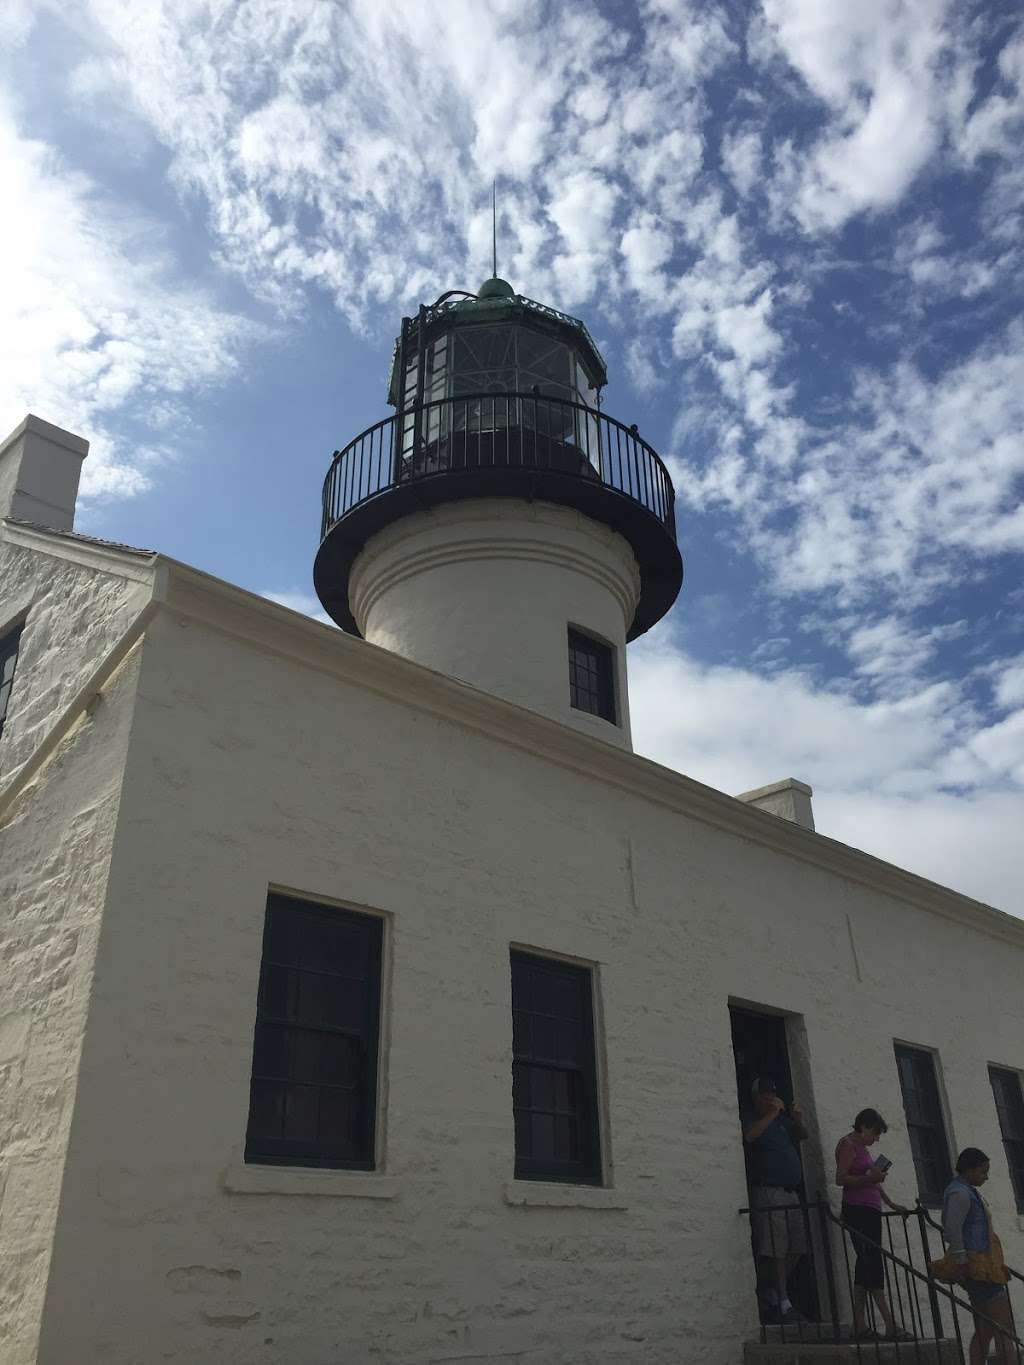 Old Point Loma Lighthouse | 1800 Cabrillo Memorial Dr, San Diego, CA 92106